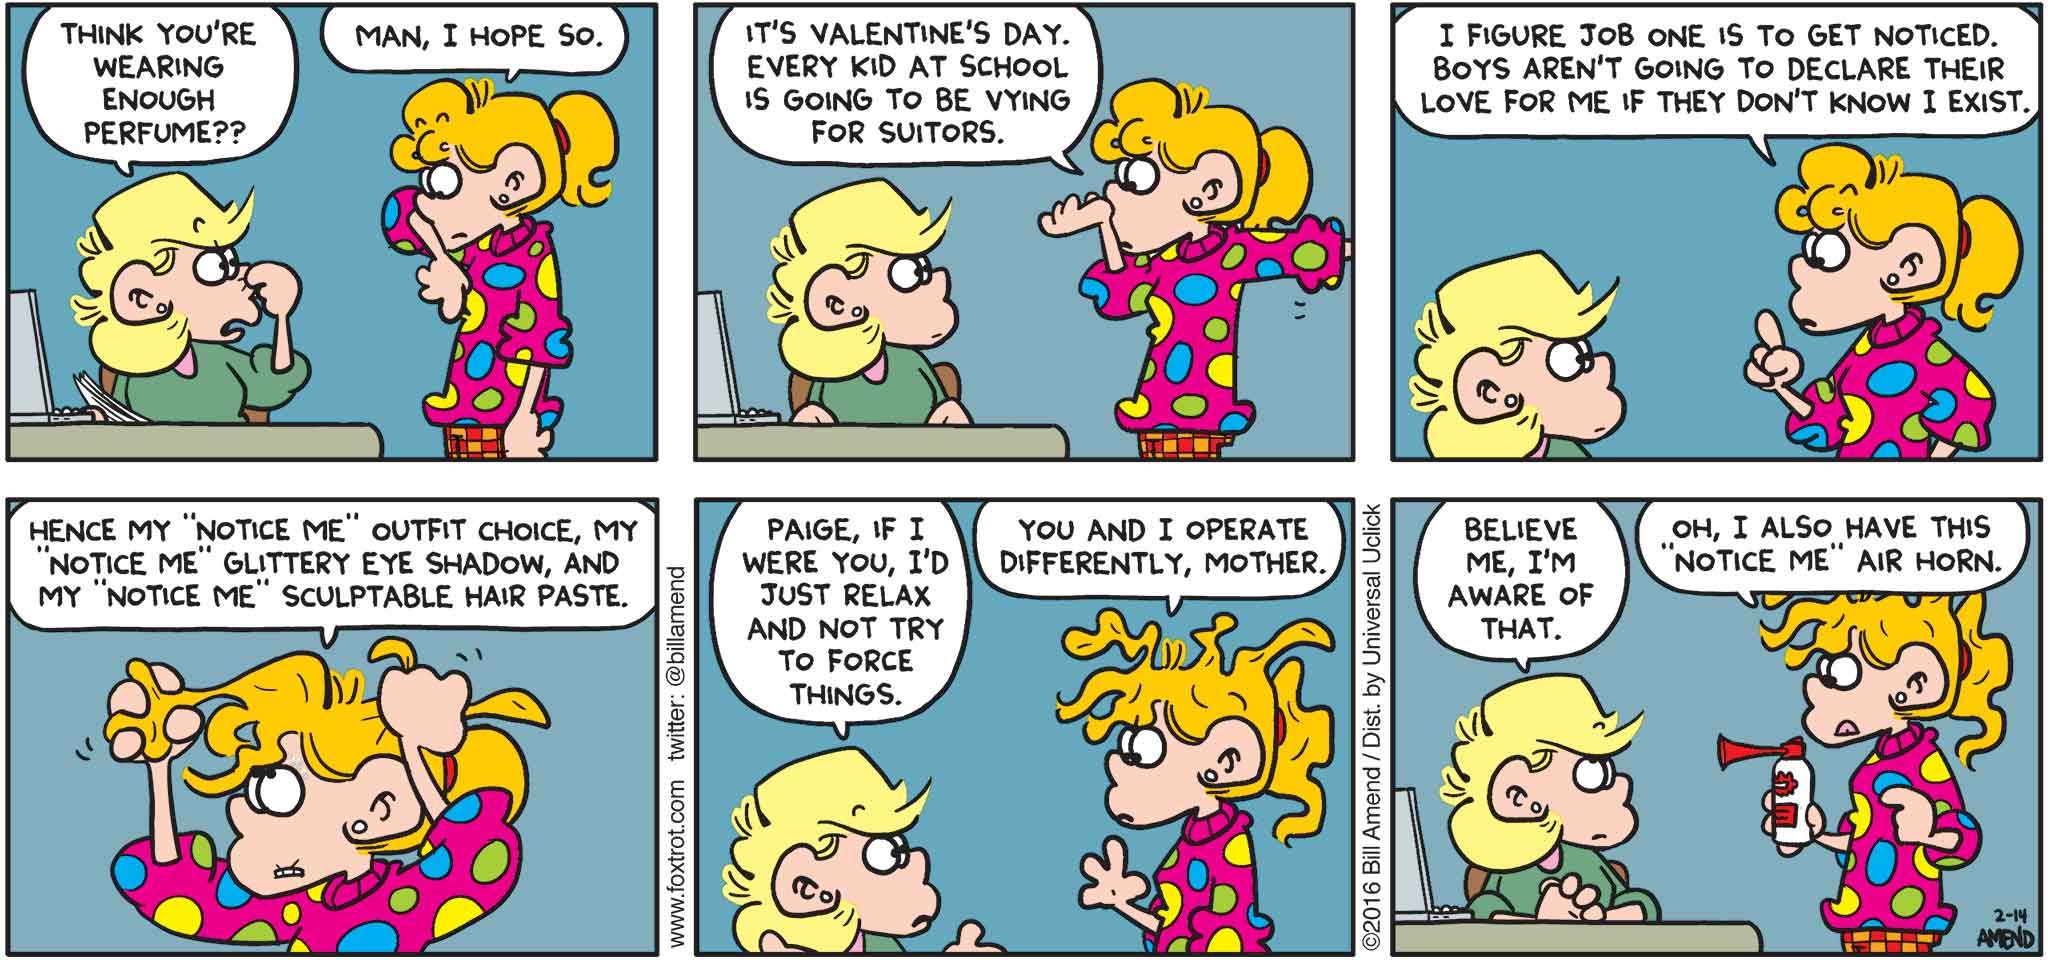 FoxTrot by Bill Amend - "Notice Me" published February 14, 2016 - Andy: Think you're wearing enough perfume?? Paige: Man, I hope so. It's Valentine's Day. Every kid at school is going to be vying for suitors. I figure job one is to get noticed. Boys aren't going to declare their love for me if they don't know I exist. Hence my "notice me" outfit choice. My "notice me" glittery eye shadow, and my "notice me" sculptable hair paste. Andy: Paige, if I were you, I'd just relax and not try to force things. Paige: You and I operate differently, mother. Andy: Believe me, I'm aware of that. Paige: Oh, I also have this "notice me" air horn.